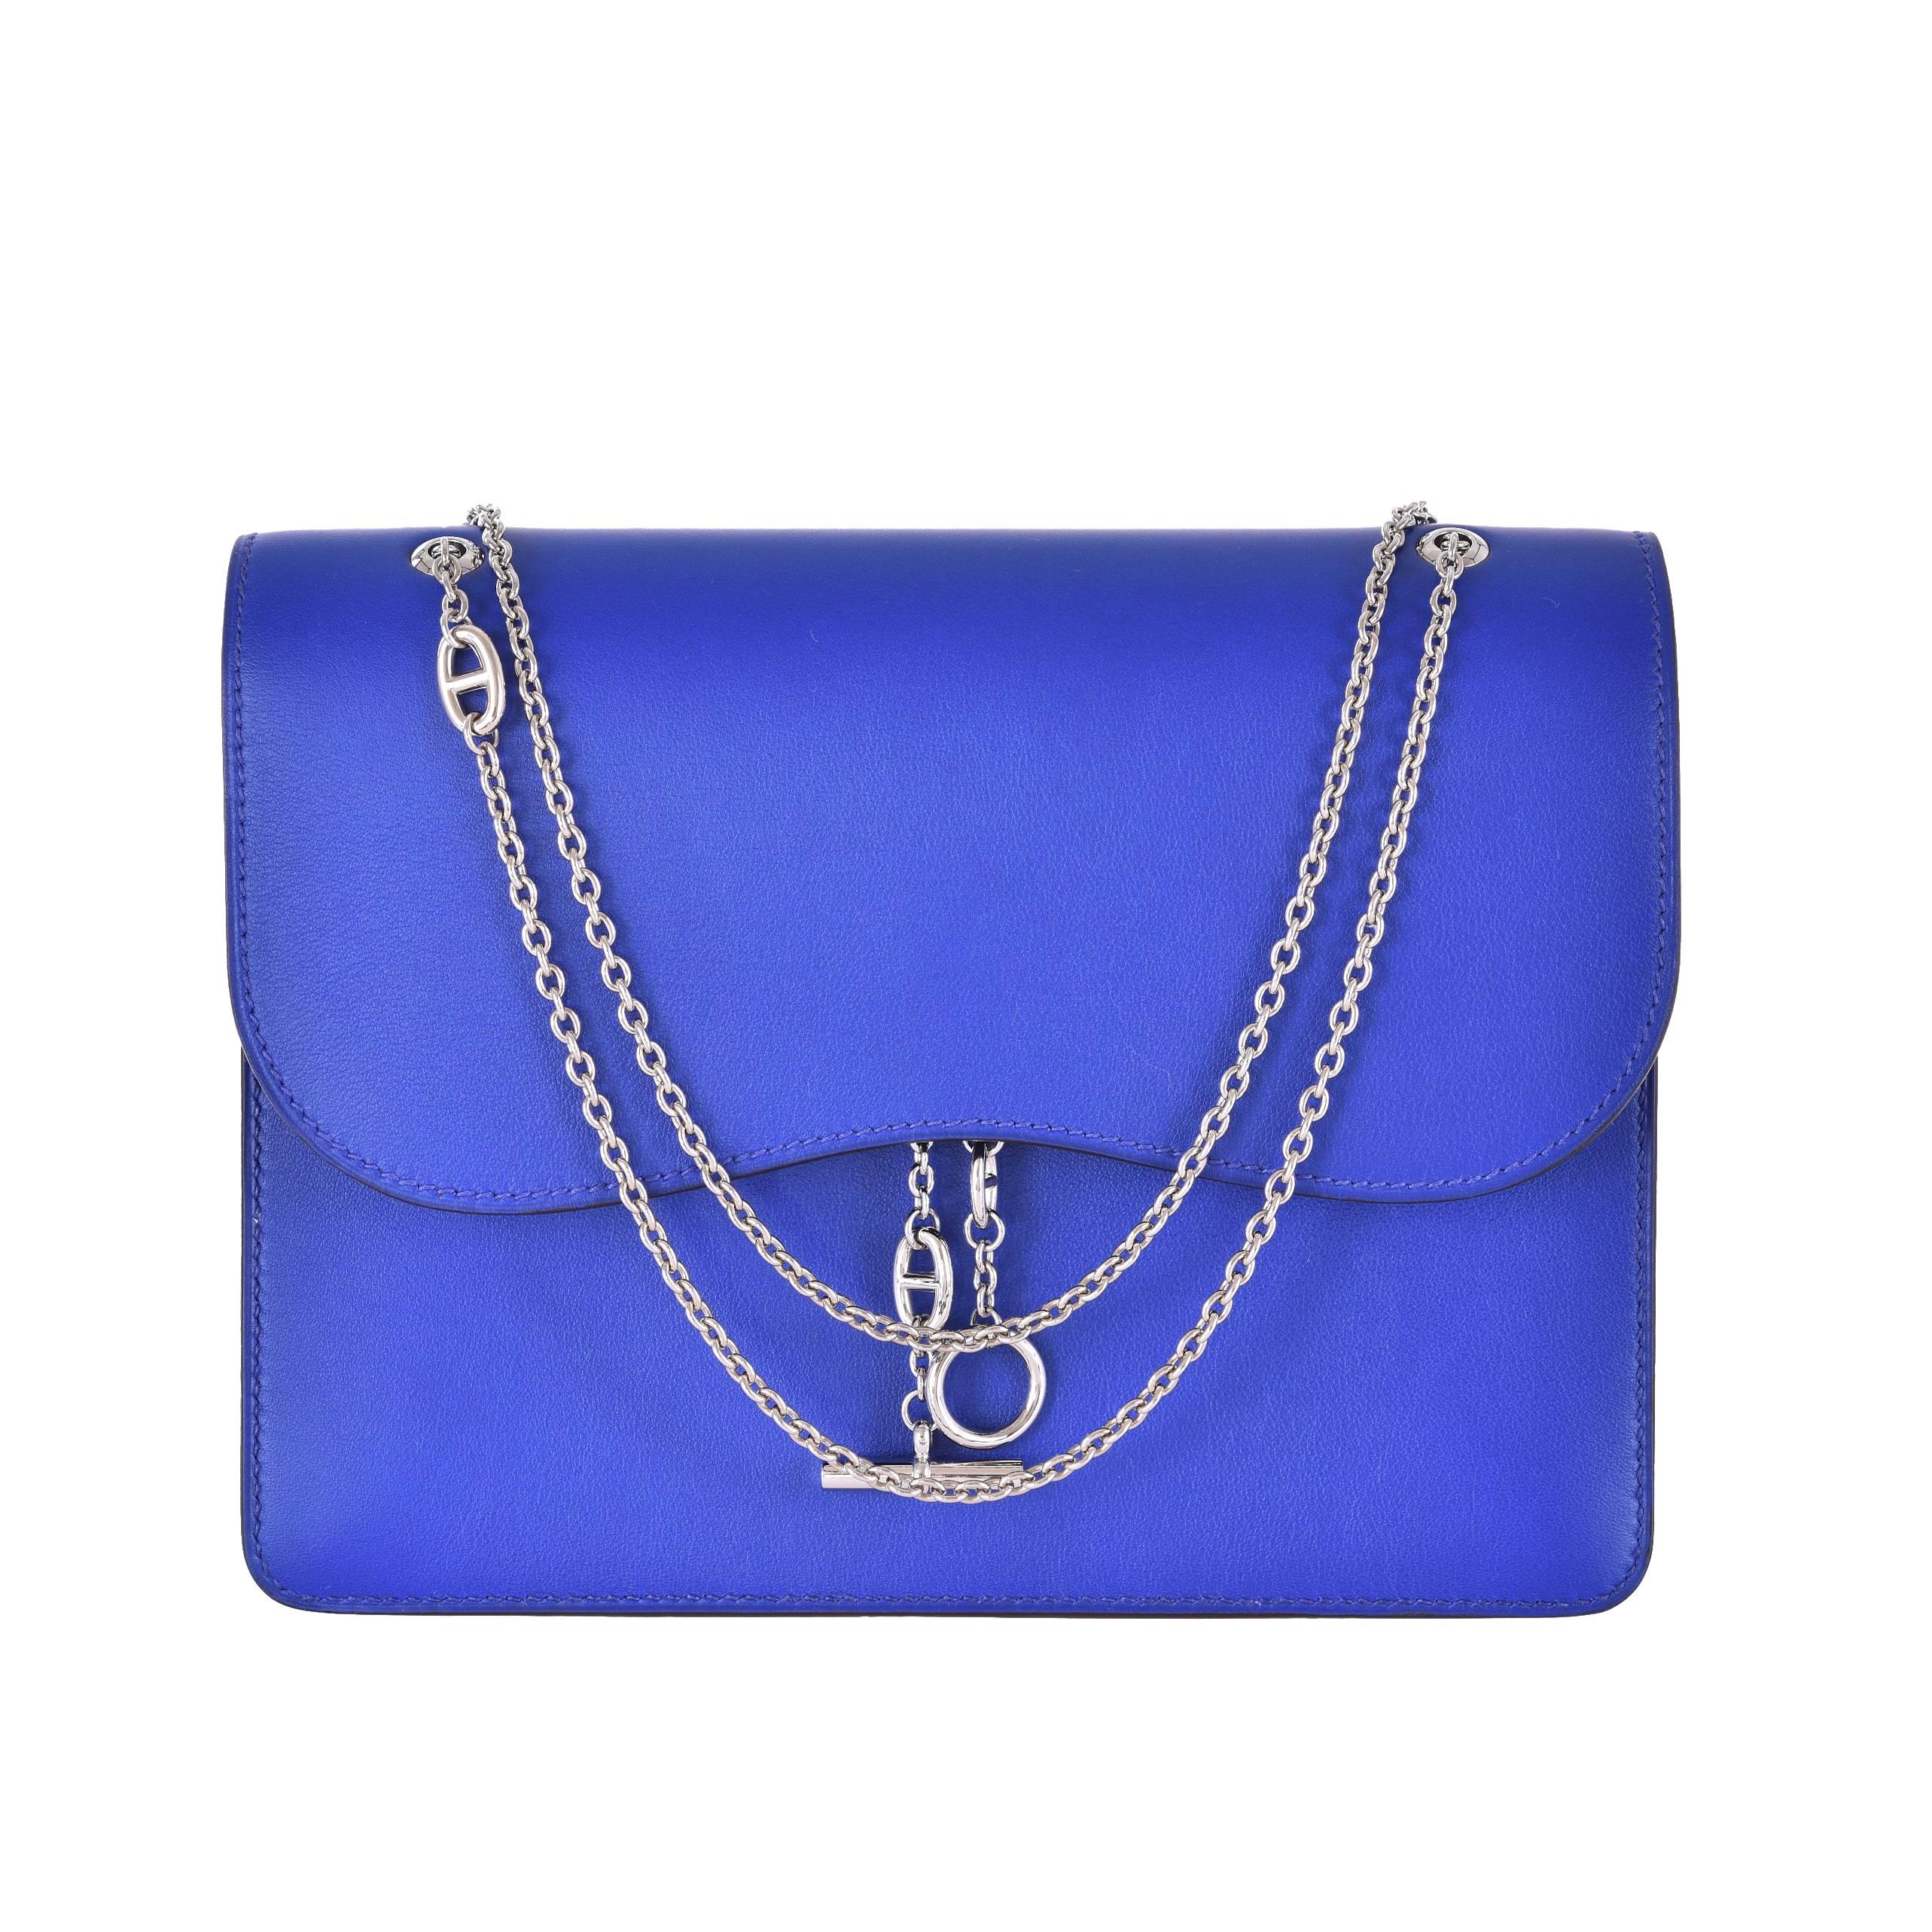 Hermes Catenina Bag Clutch Blue Electric Gorgeous New Bag! JaneFinds